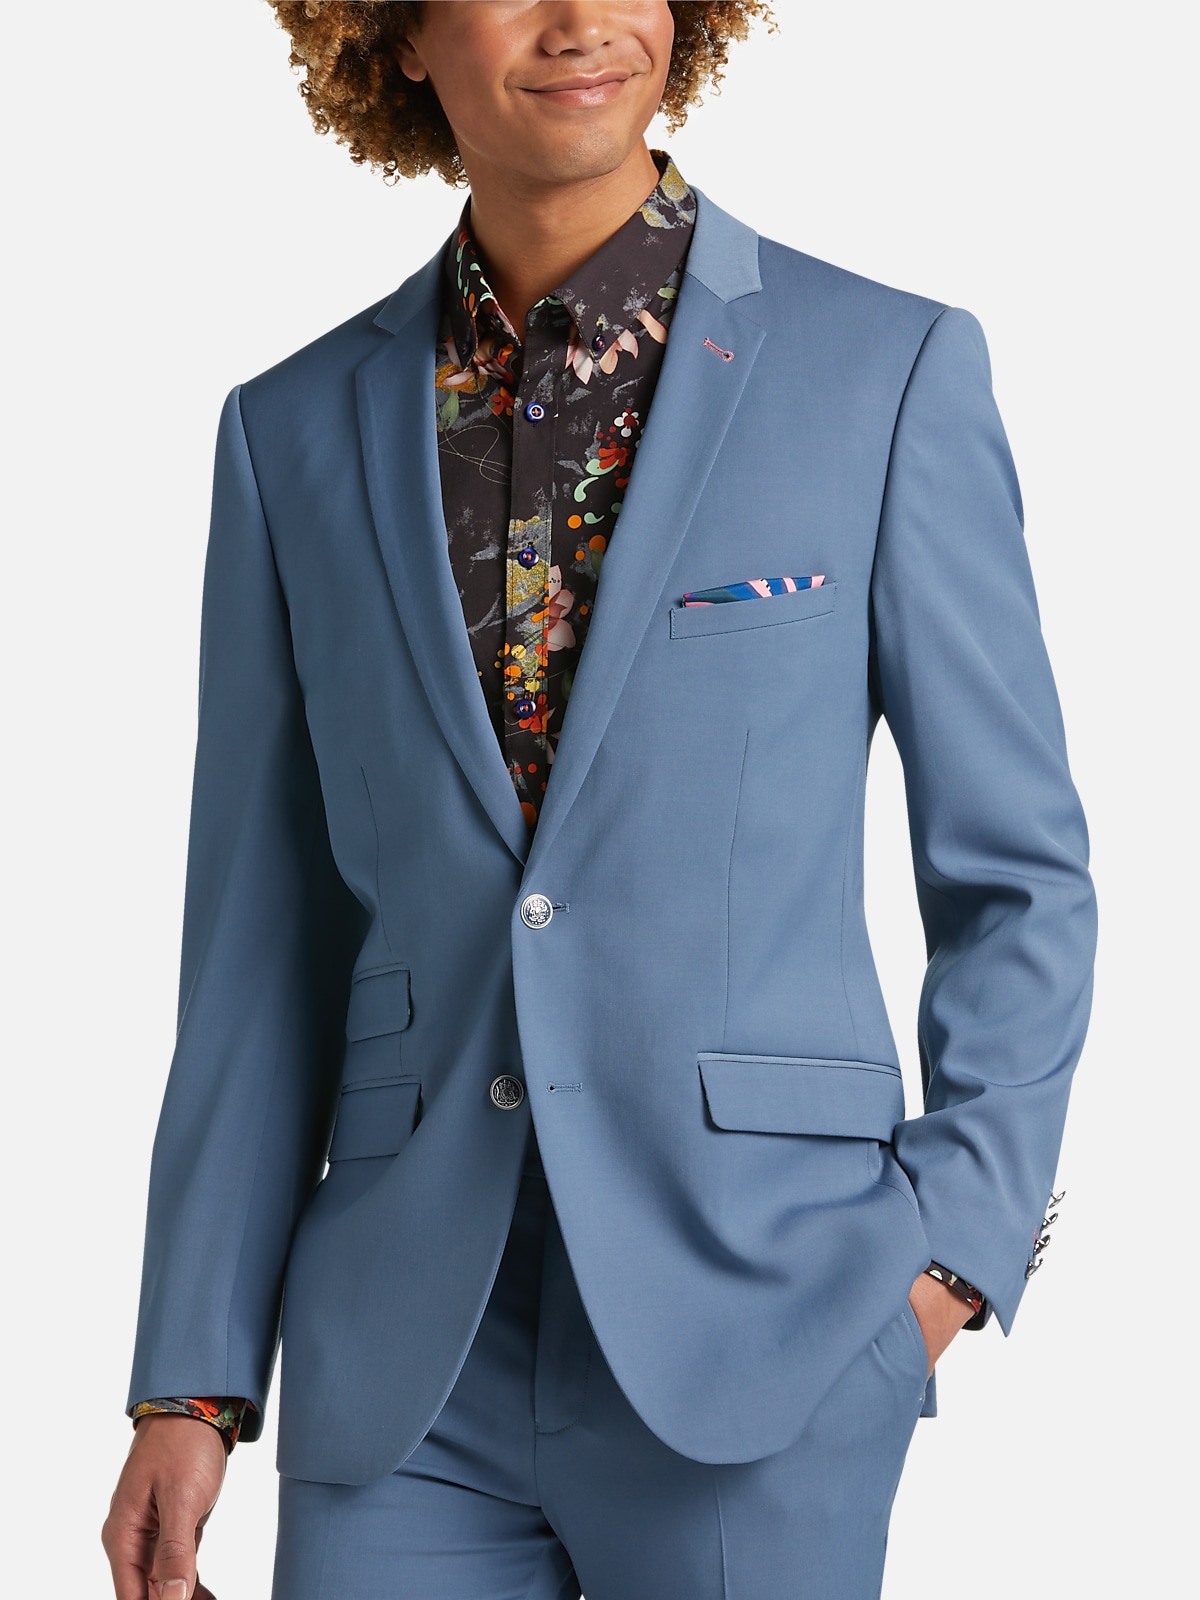 https://image.menswearhouse.com/is/image/TMW/TMW_3XJ0_82_PAISLEY_GRAY_SUIT_SEPARATE_JACKETS_SLATE_BLUE_MAIN?imPolicy=pdp-zoom-mob